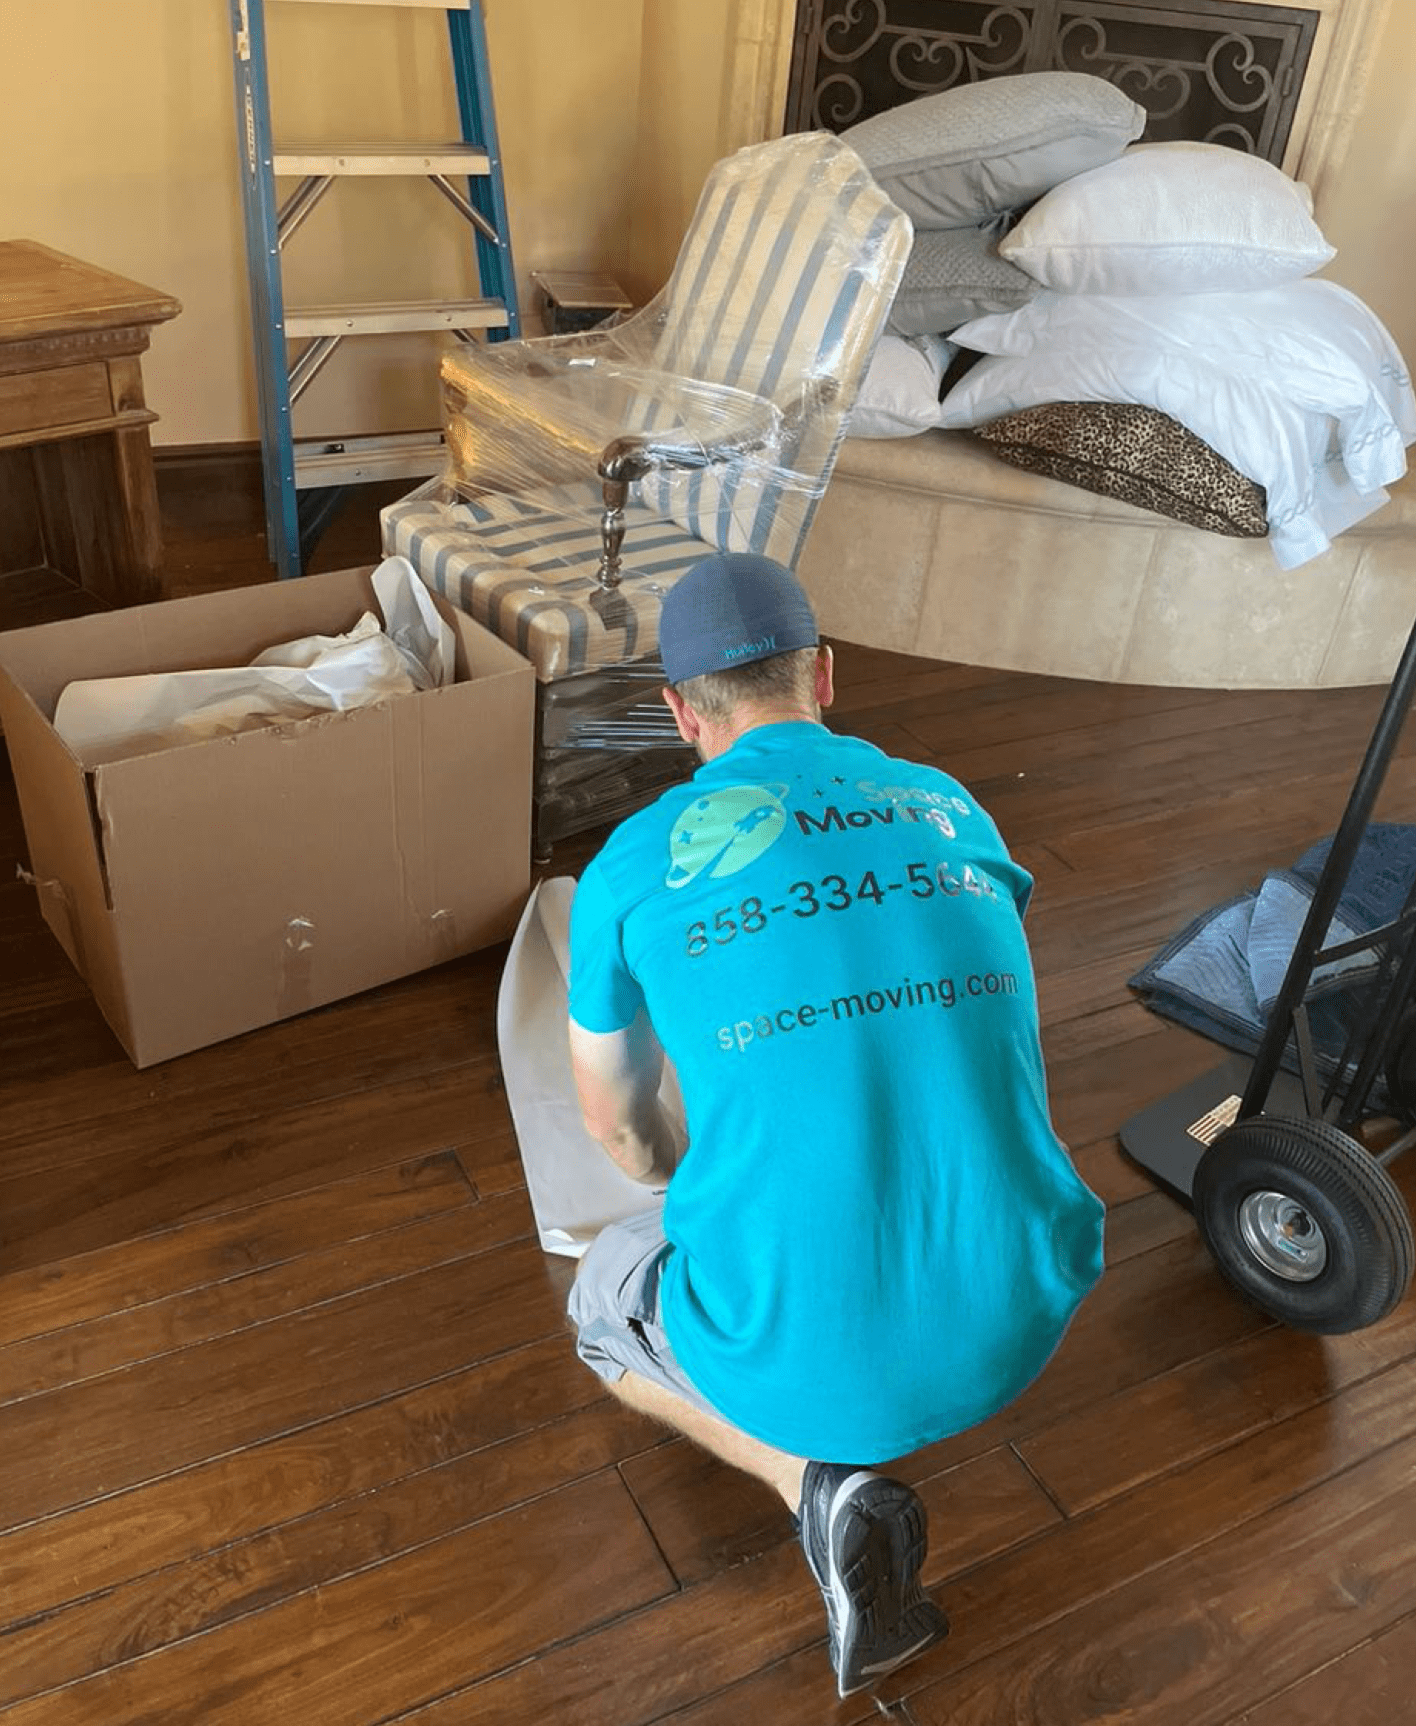 Move with Confidence: Top-Rated Movers in Your Area